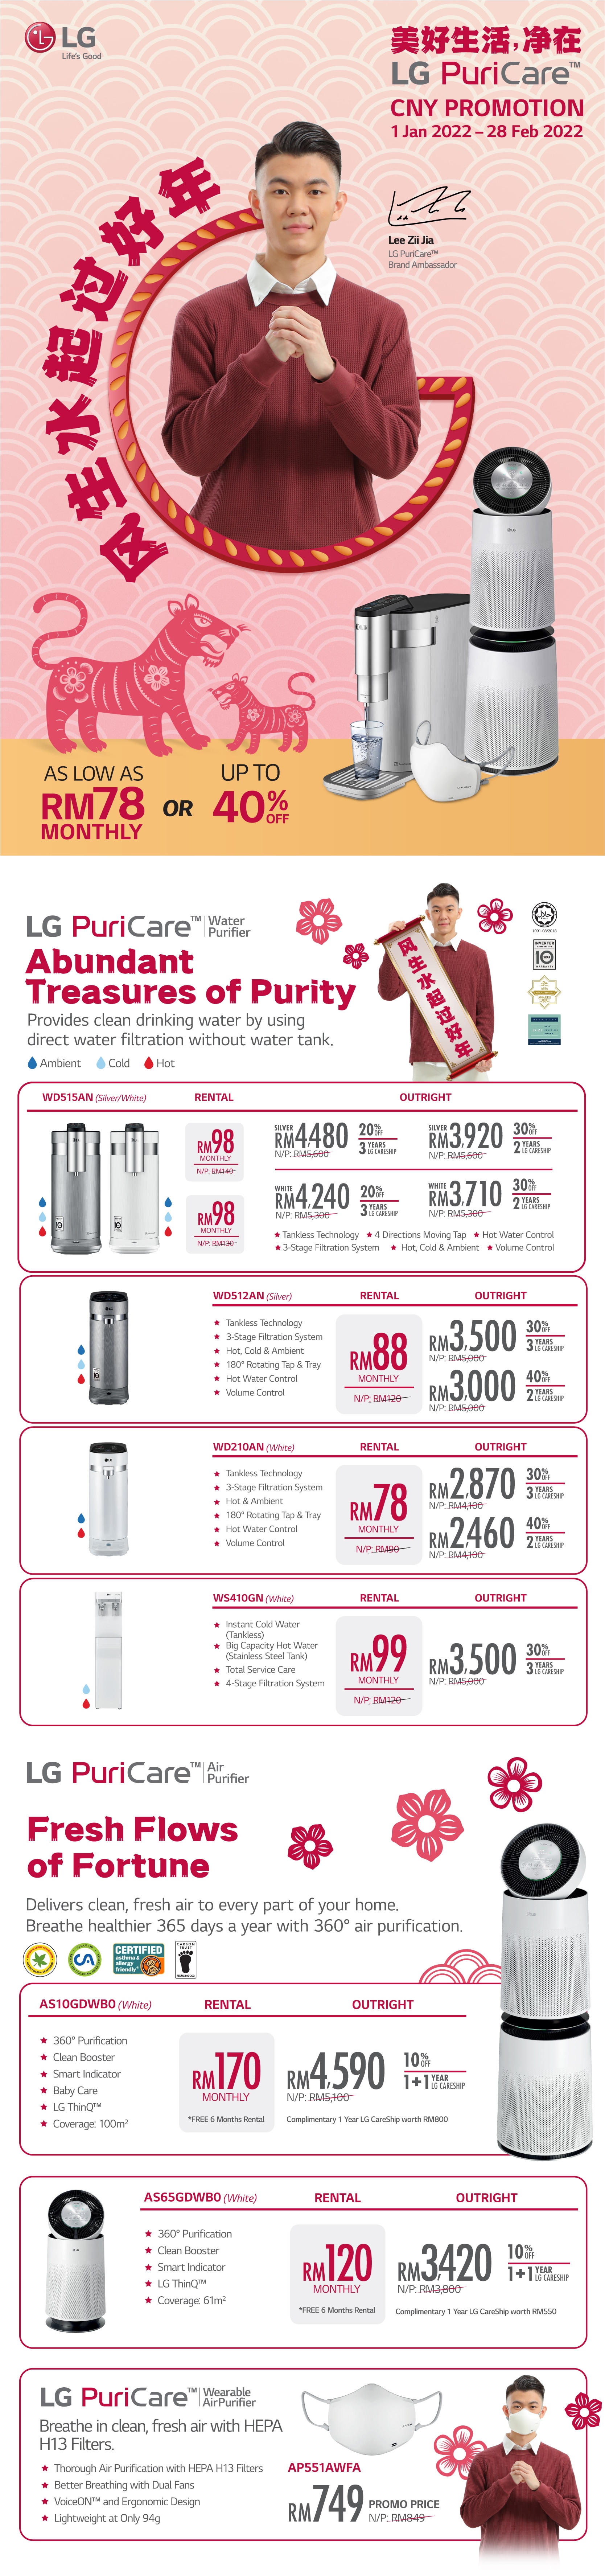 LG-PuriCare-CNY%20promo-page-DST